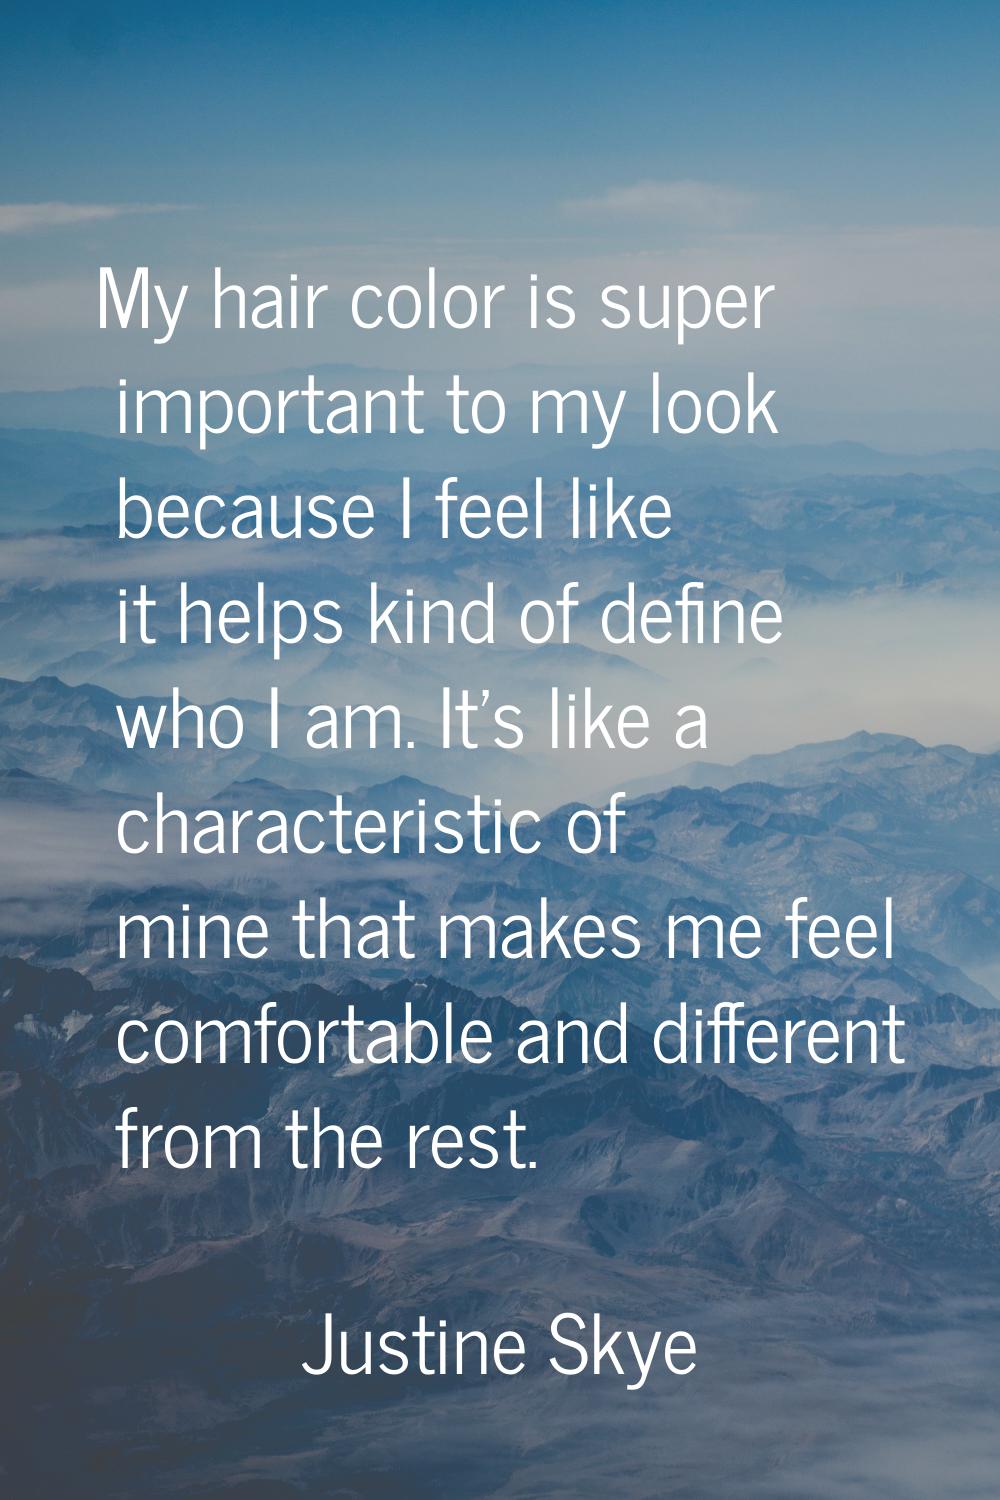 My hair color is super important to my look because I feel like it helps kind of define who I am. I